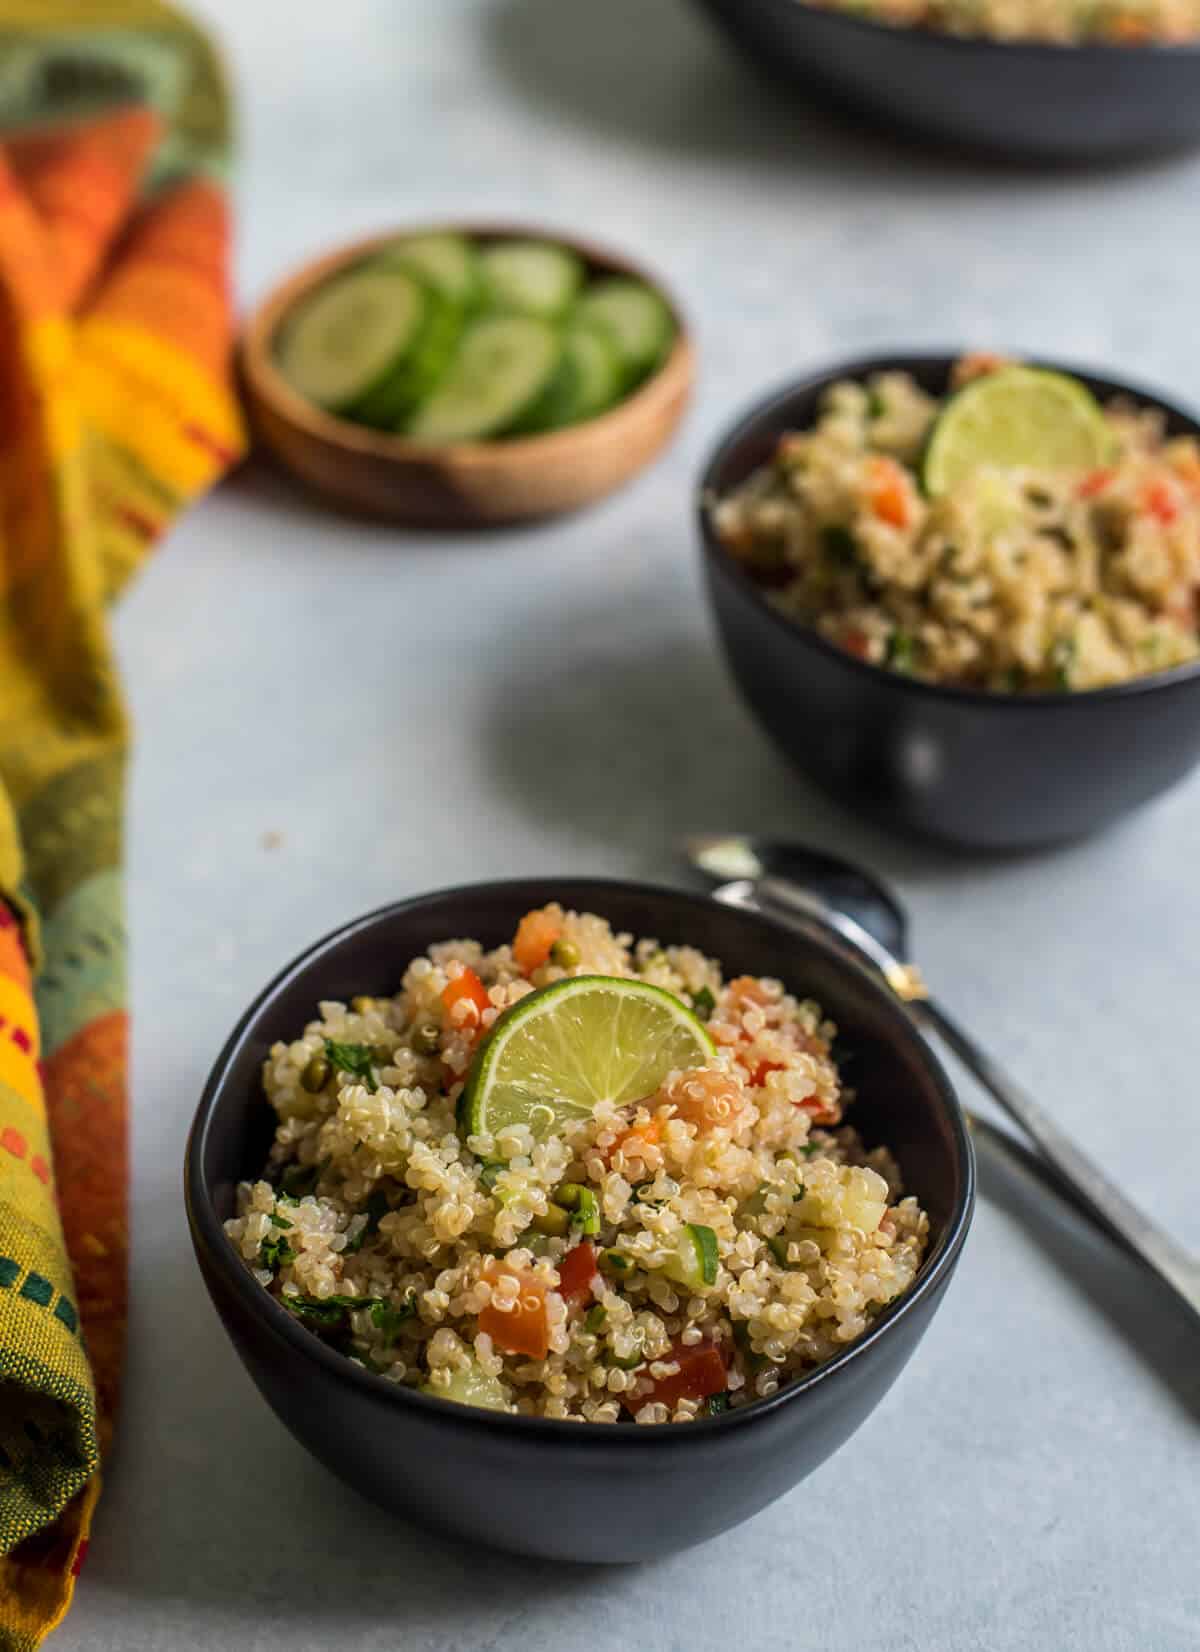 Two small black bowls of quinoa salad with a spoon in between the two bowls and a small brown bowl to the back left with cucumber slices and a colorful dish towel on the left side of the photo.